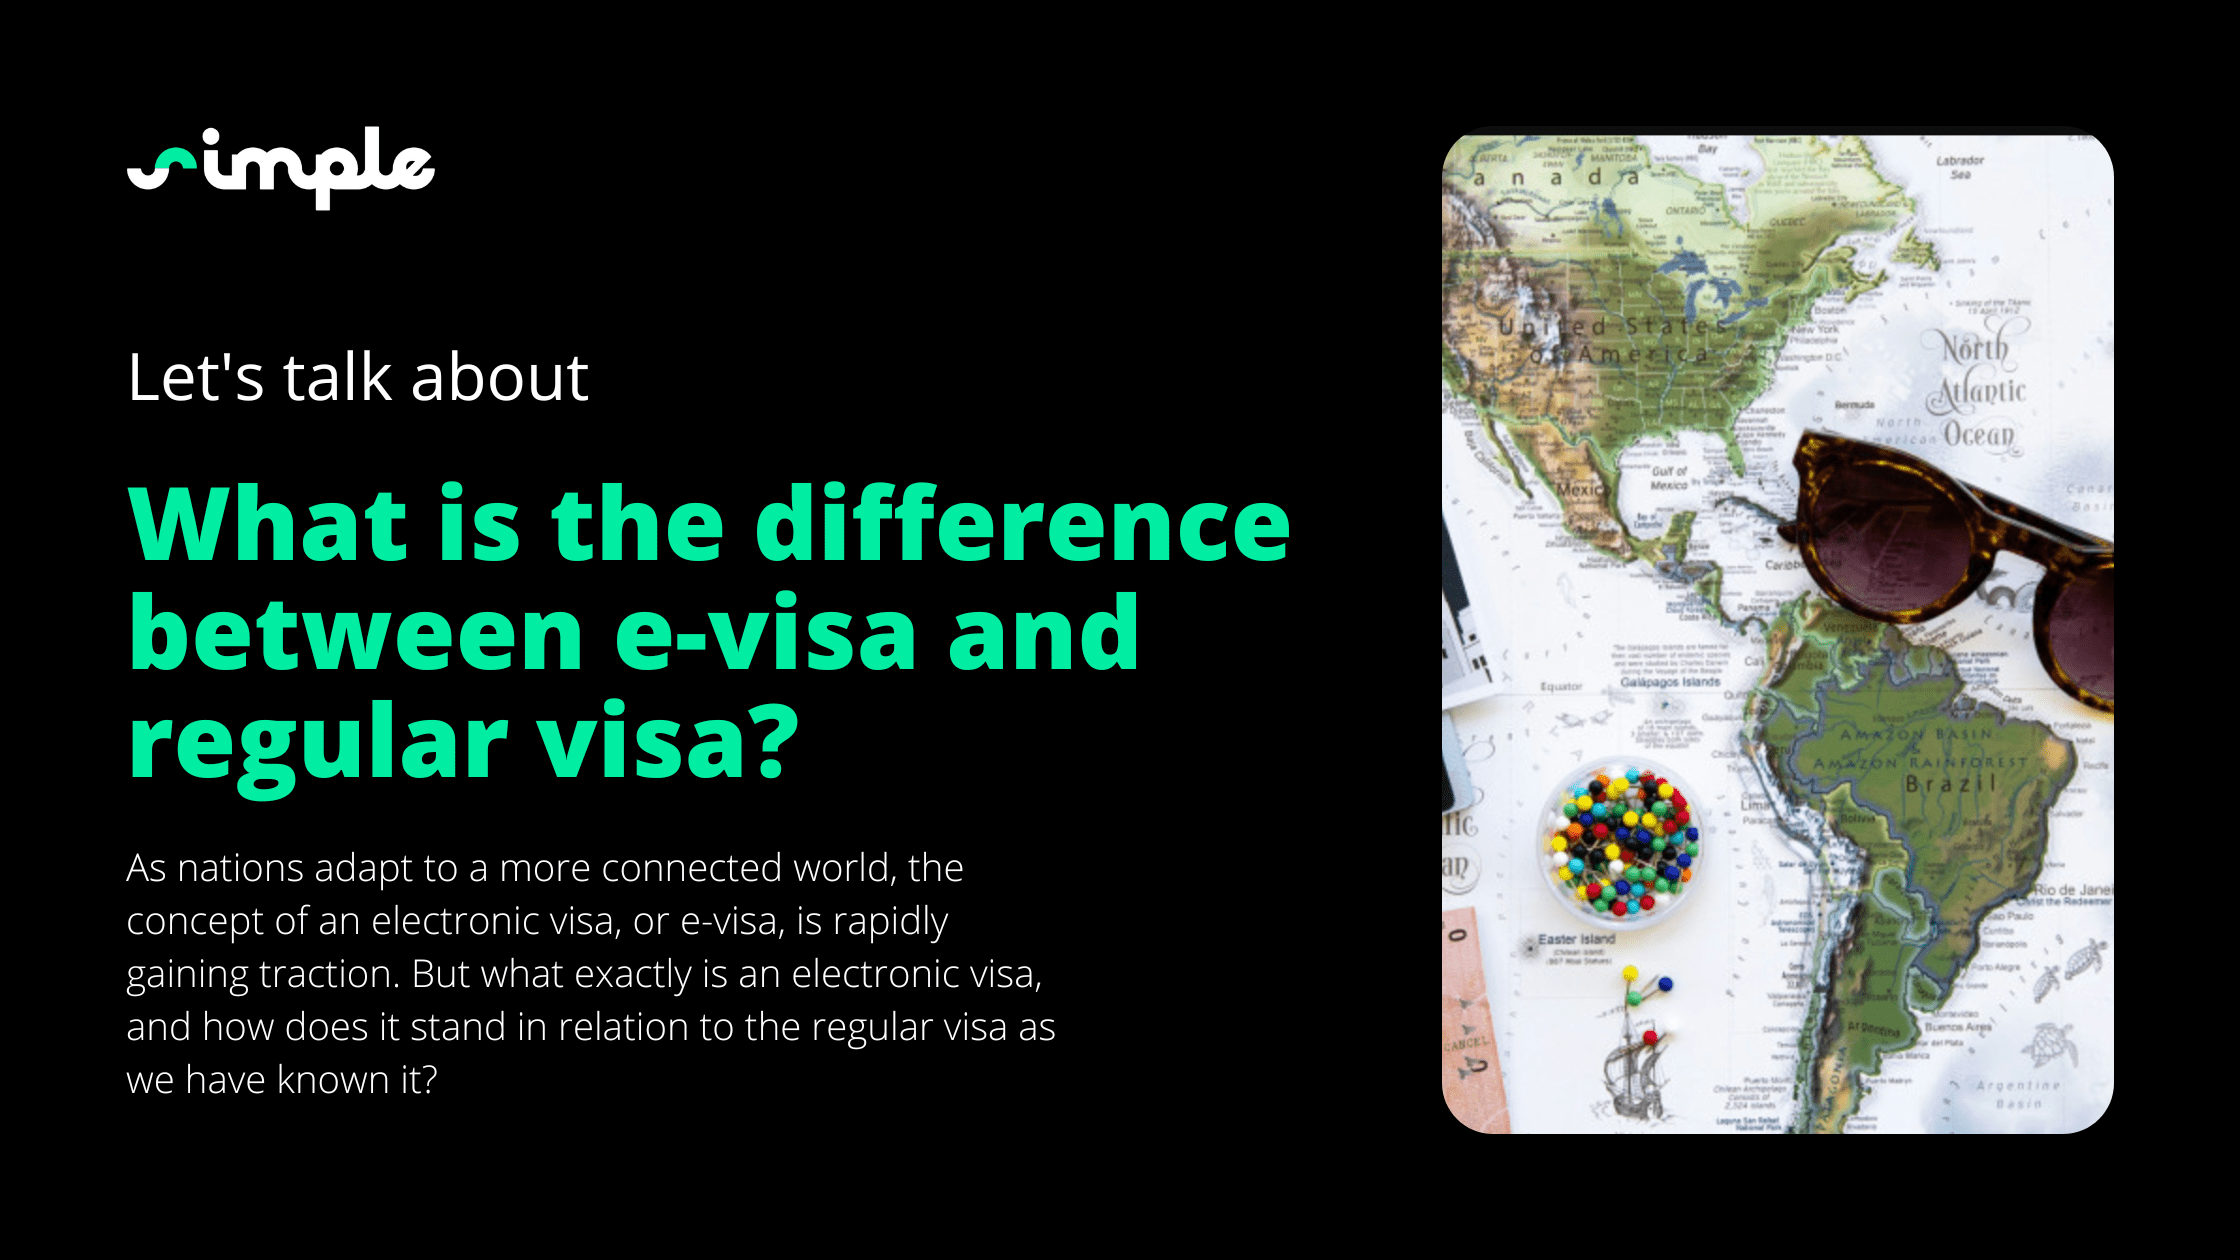 What is the difference between an electronic visa and regular visa?